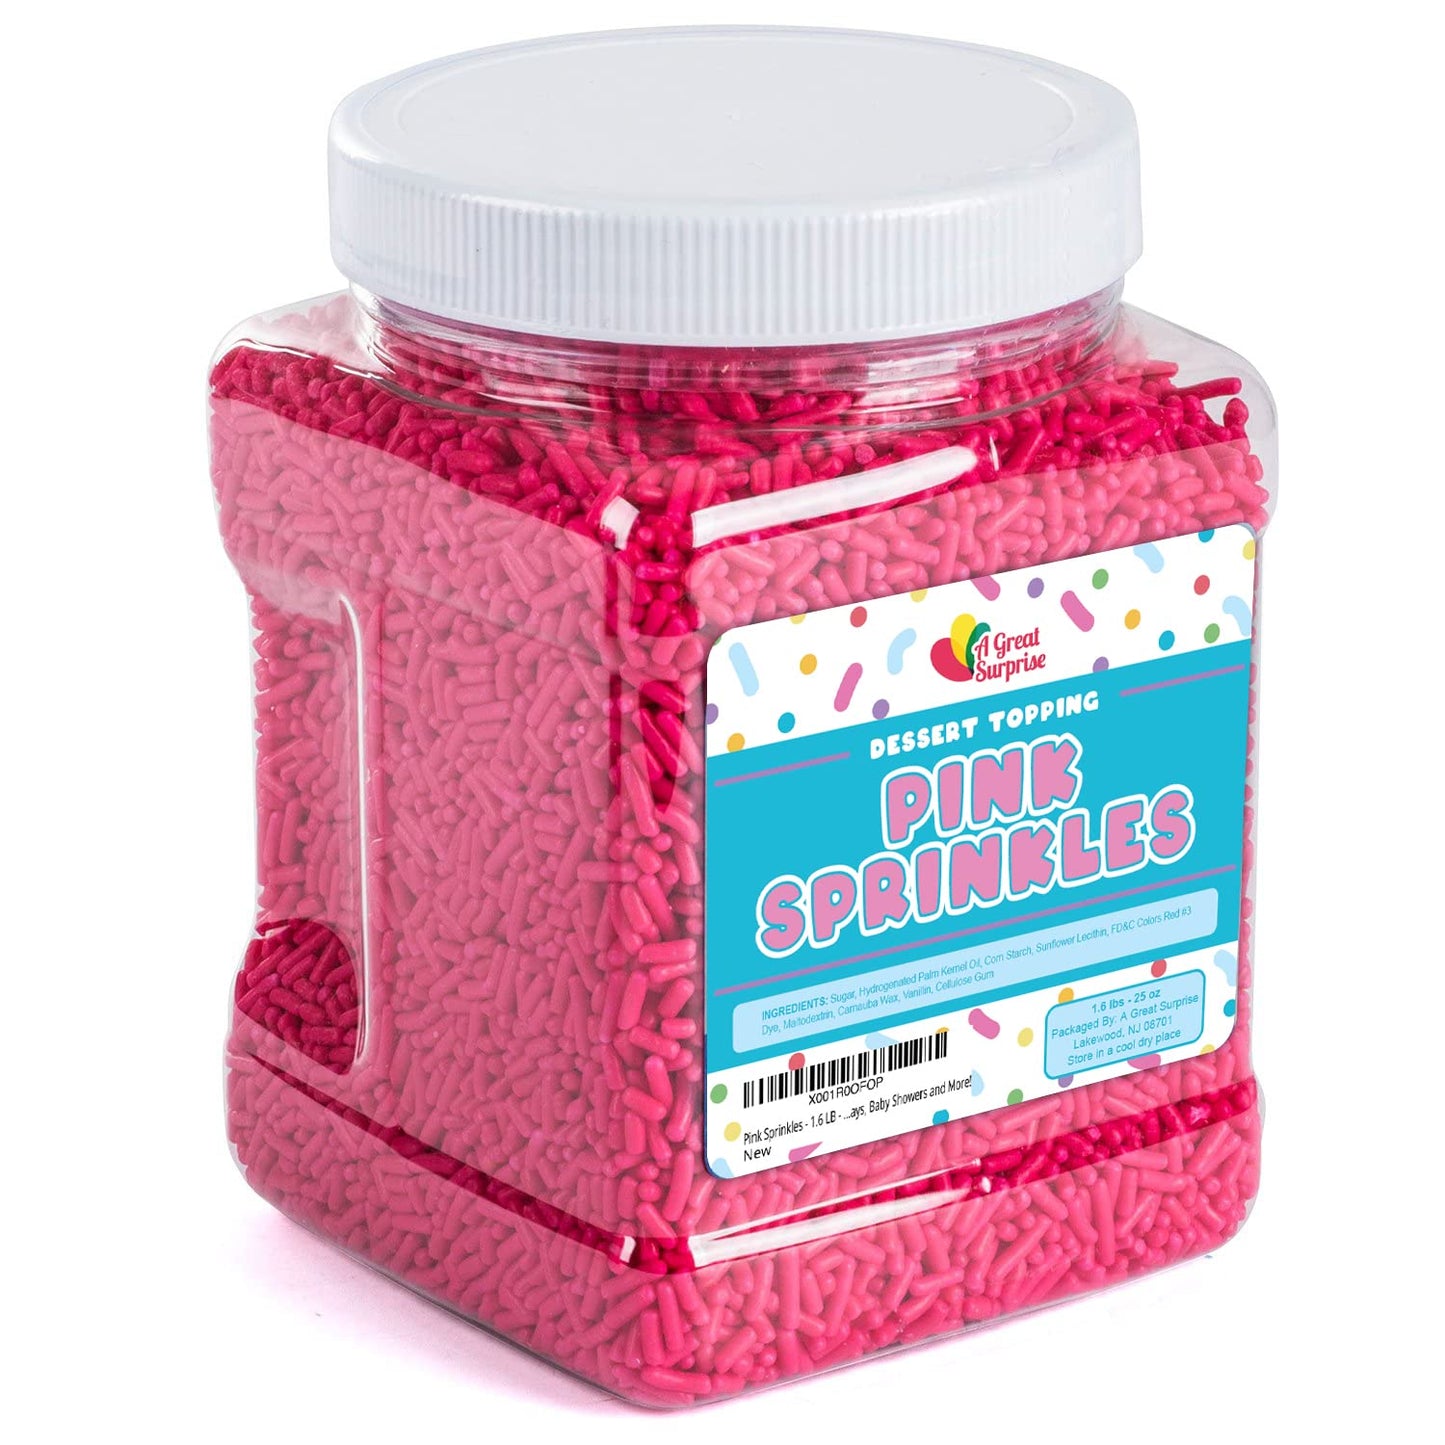 Pink Sprinkles - 1.6 LB - Pink Sprinkles Bulk - Pink Sprinkles Jimmies - Dessert Toppings for Mothers Day, Birthdays, Baby Showers and More!